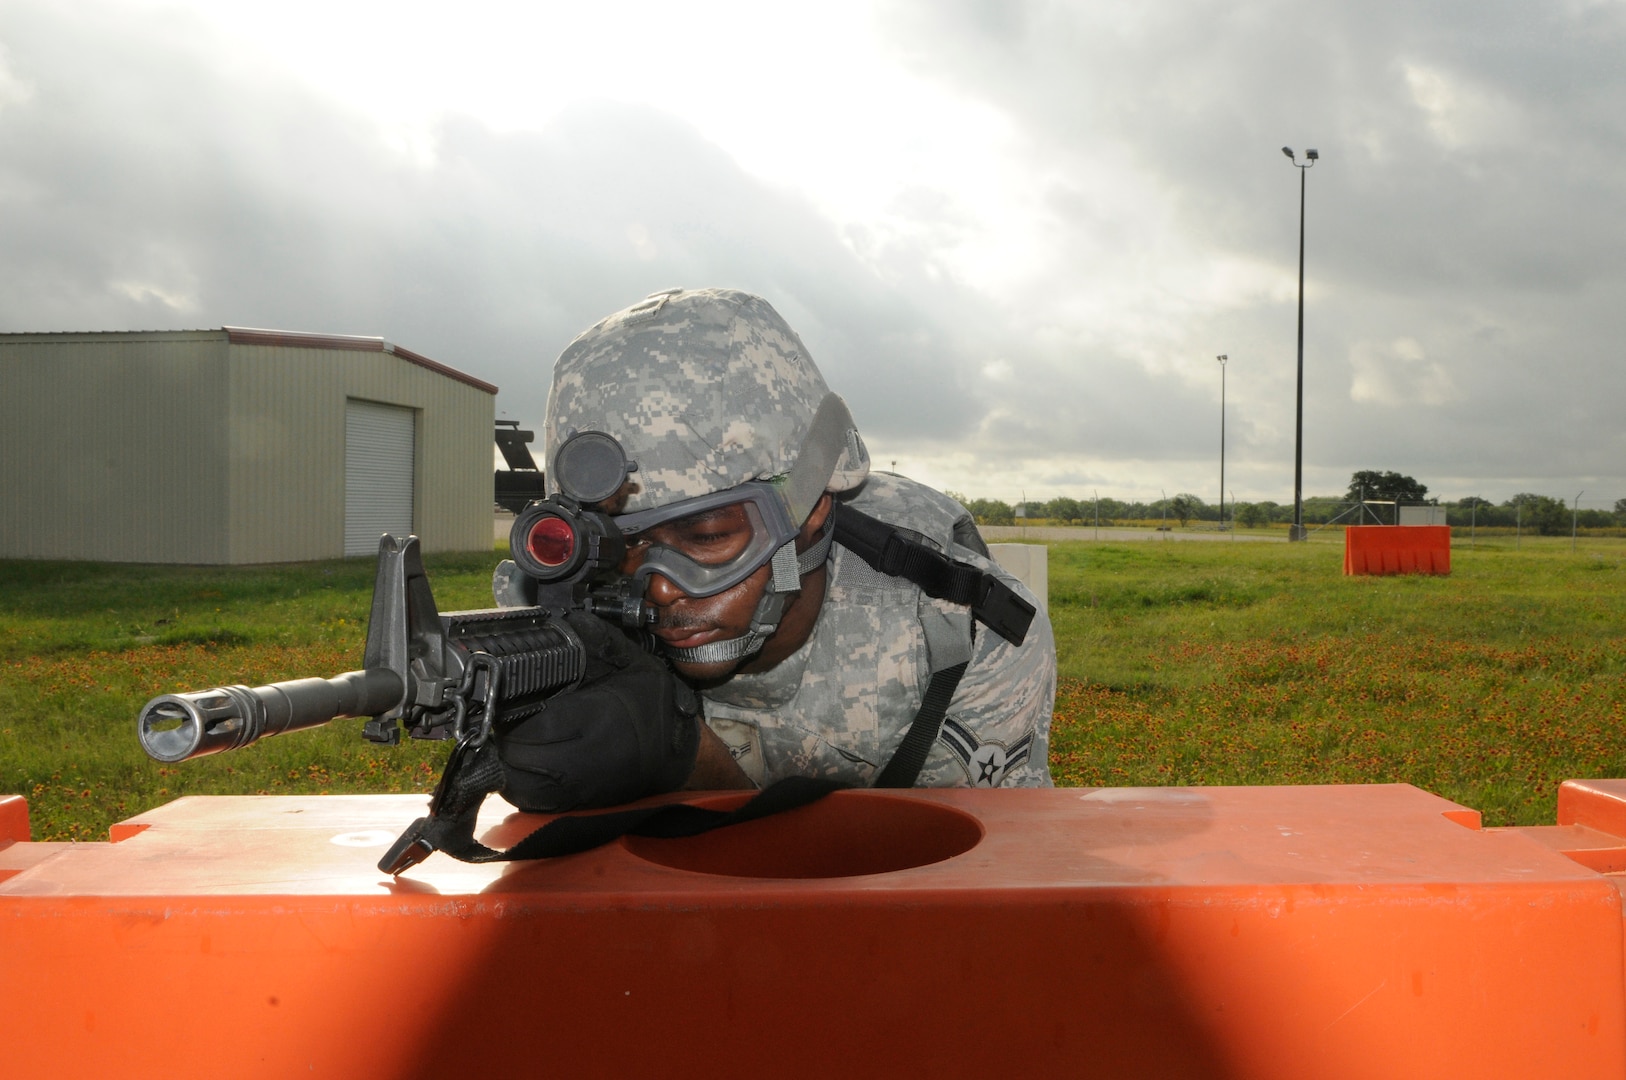 Airman 1st Class Carl Martin, 902nd Security Forces Squadron installation police officer, keeps his eye on the target during Shoot, Move and Communicate training at Camp Talon on Joint Base San Antonio- Randolph, June 7.  (U.S. Air Force Photo by Don Lindsey)